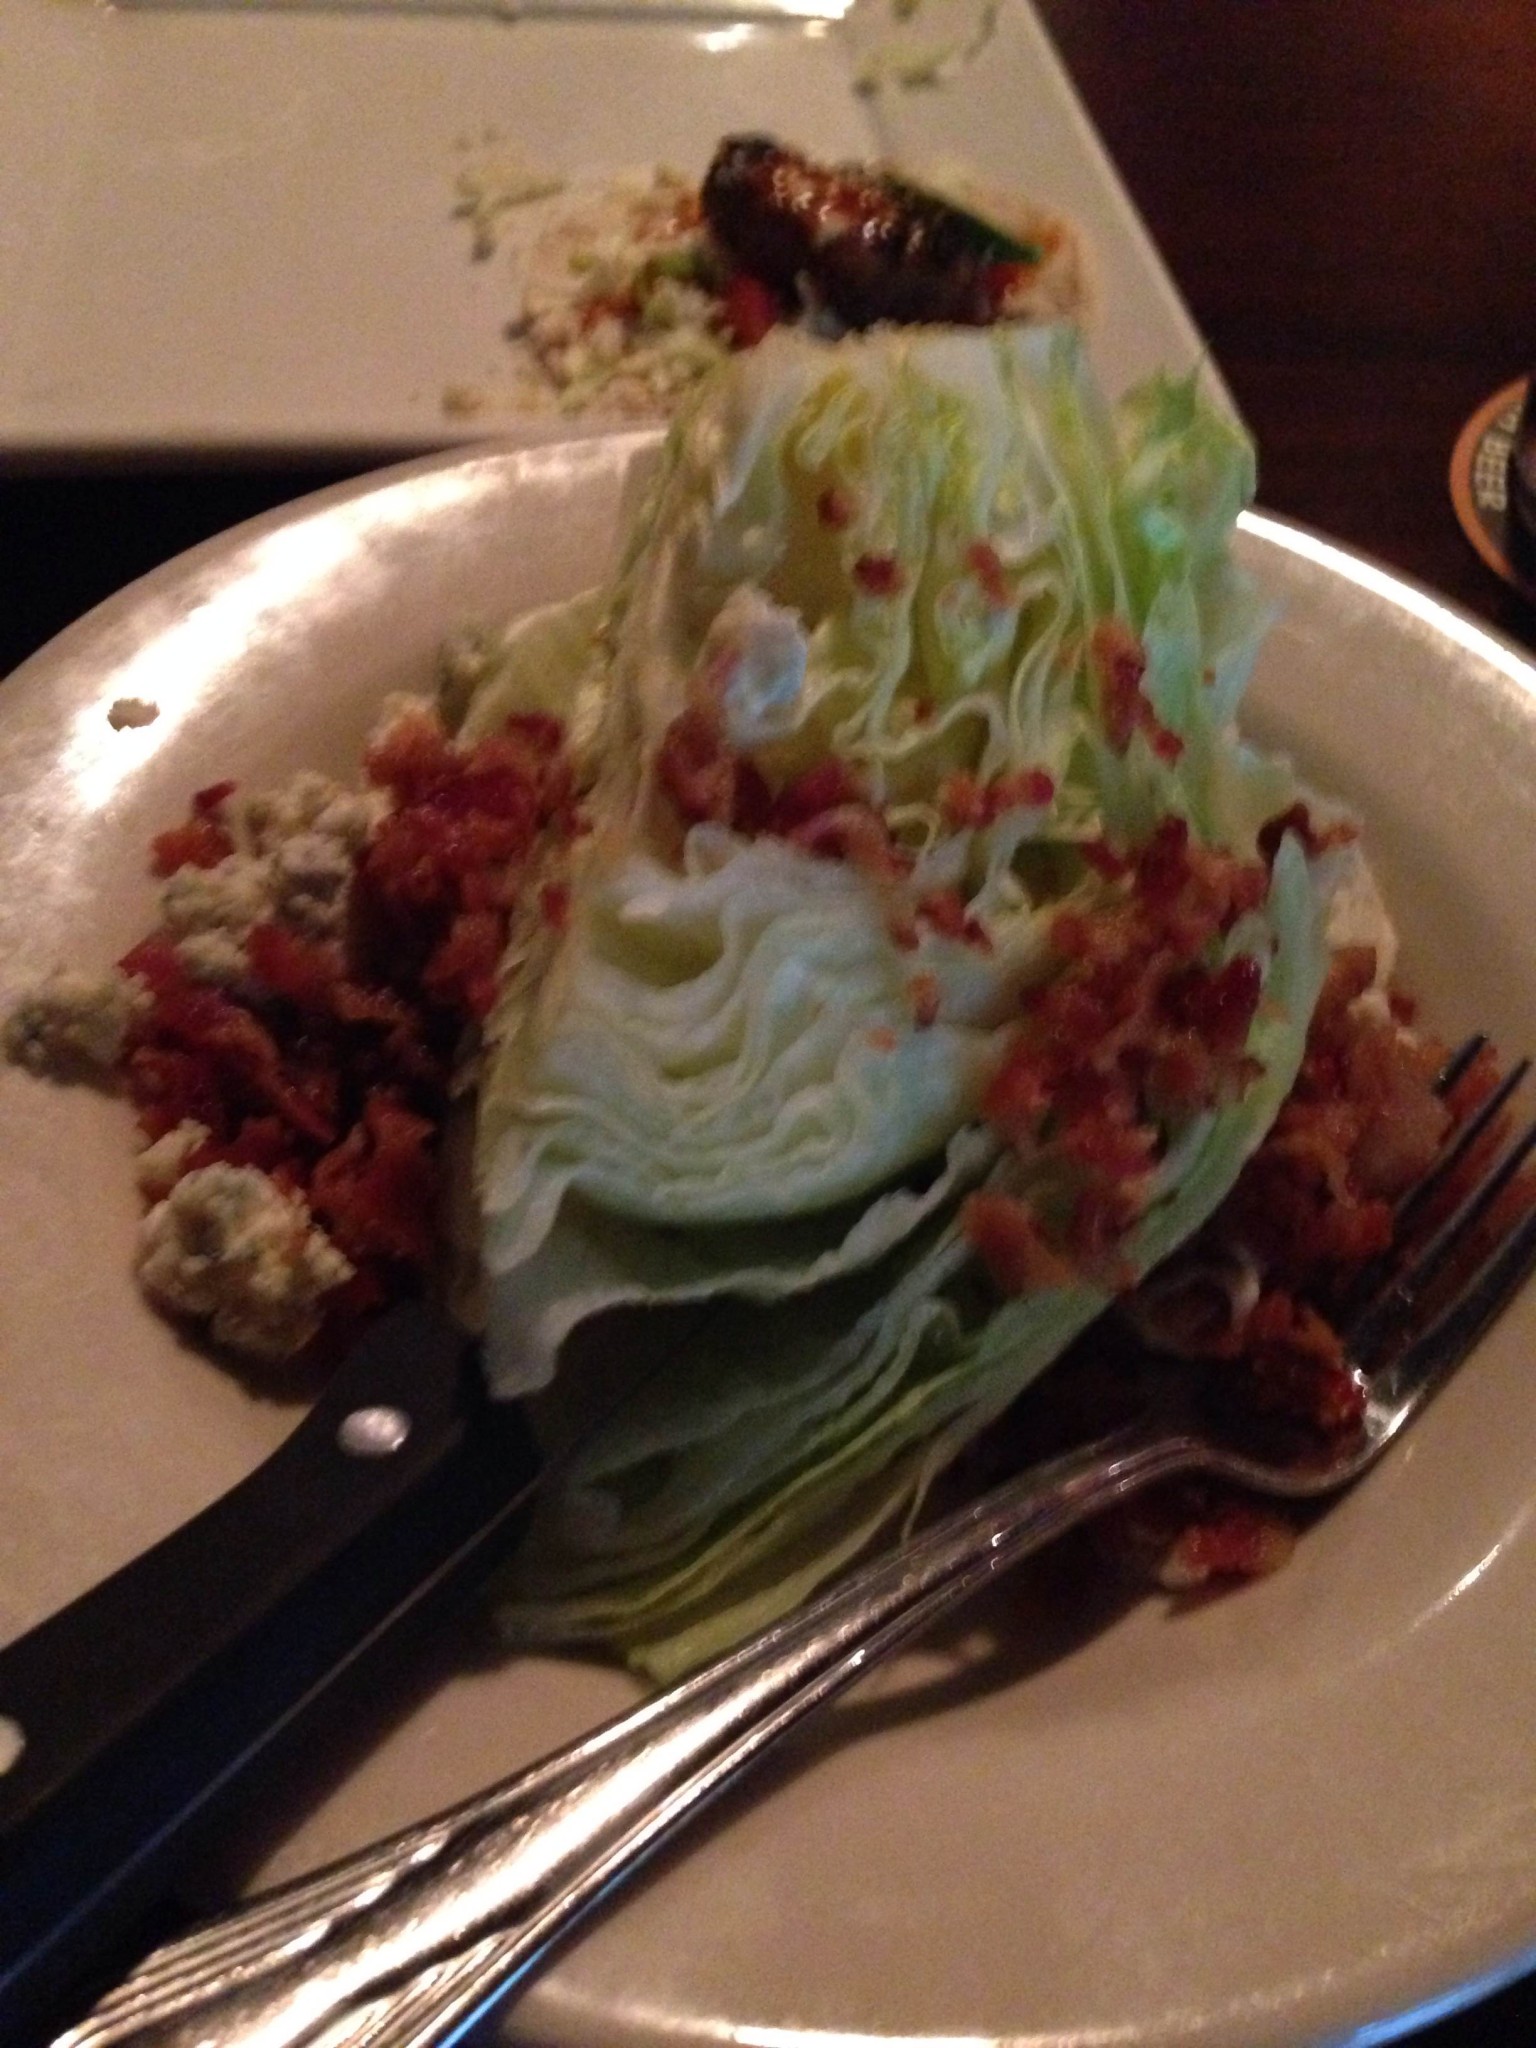 Seven Bridges - Wedge Salad with Really Good Blue Cheese